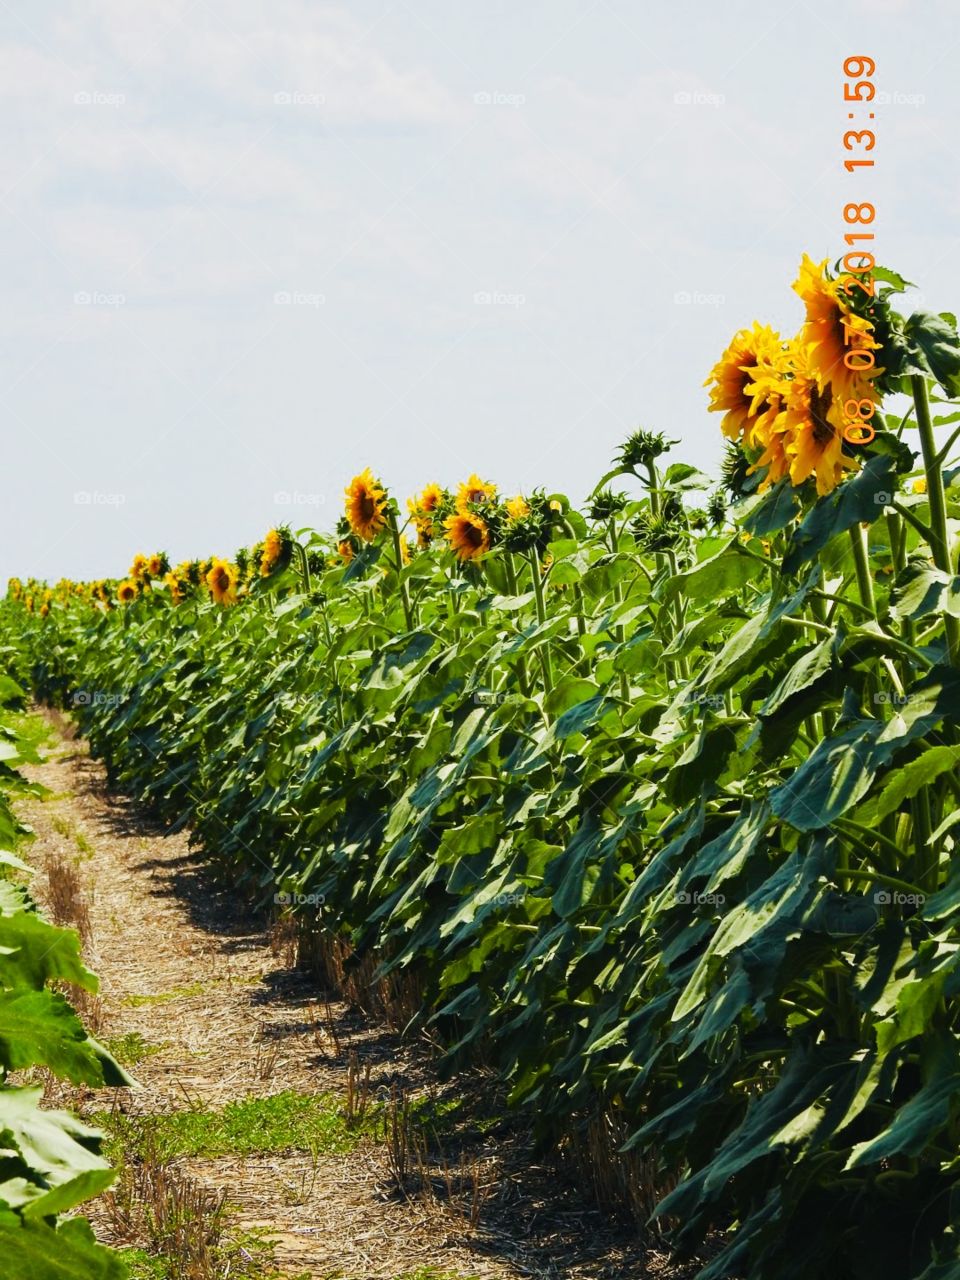 Rows of Sunflowers 😍